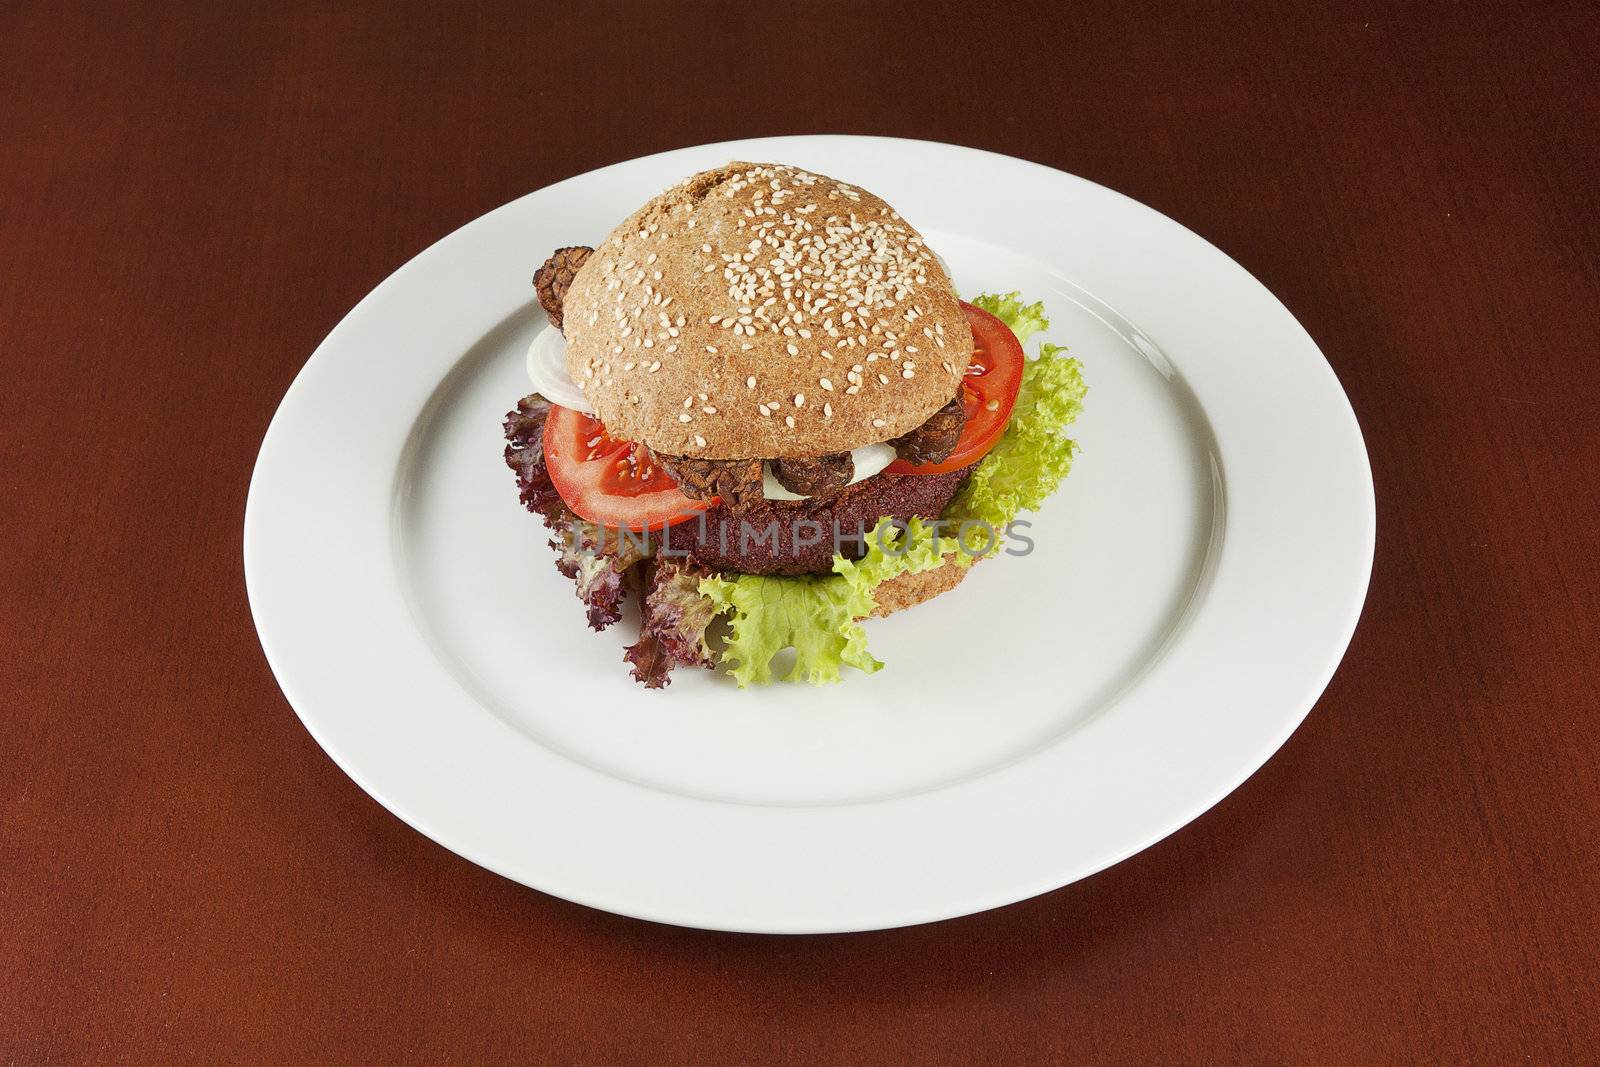 Macrobiotic burger on the white plate